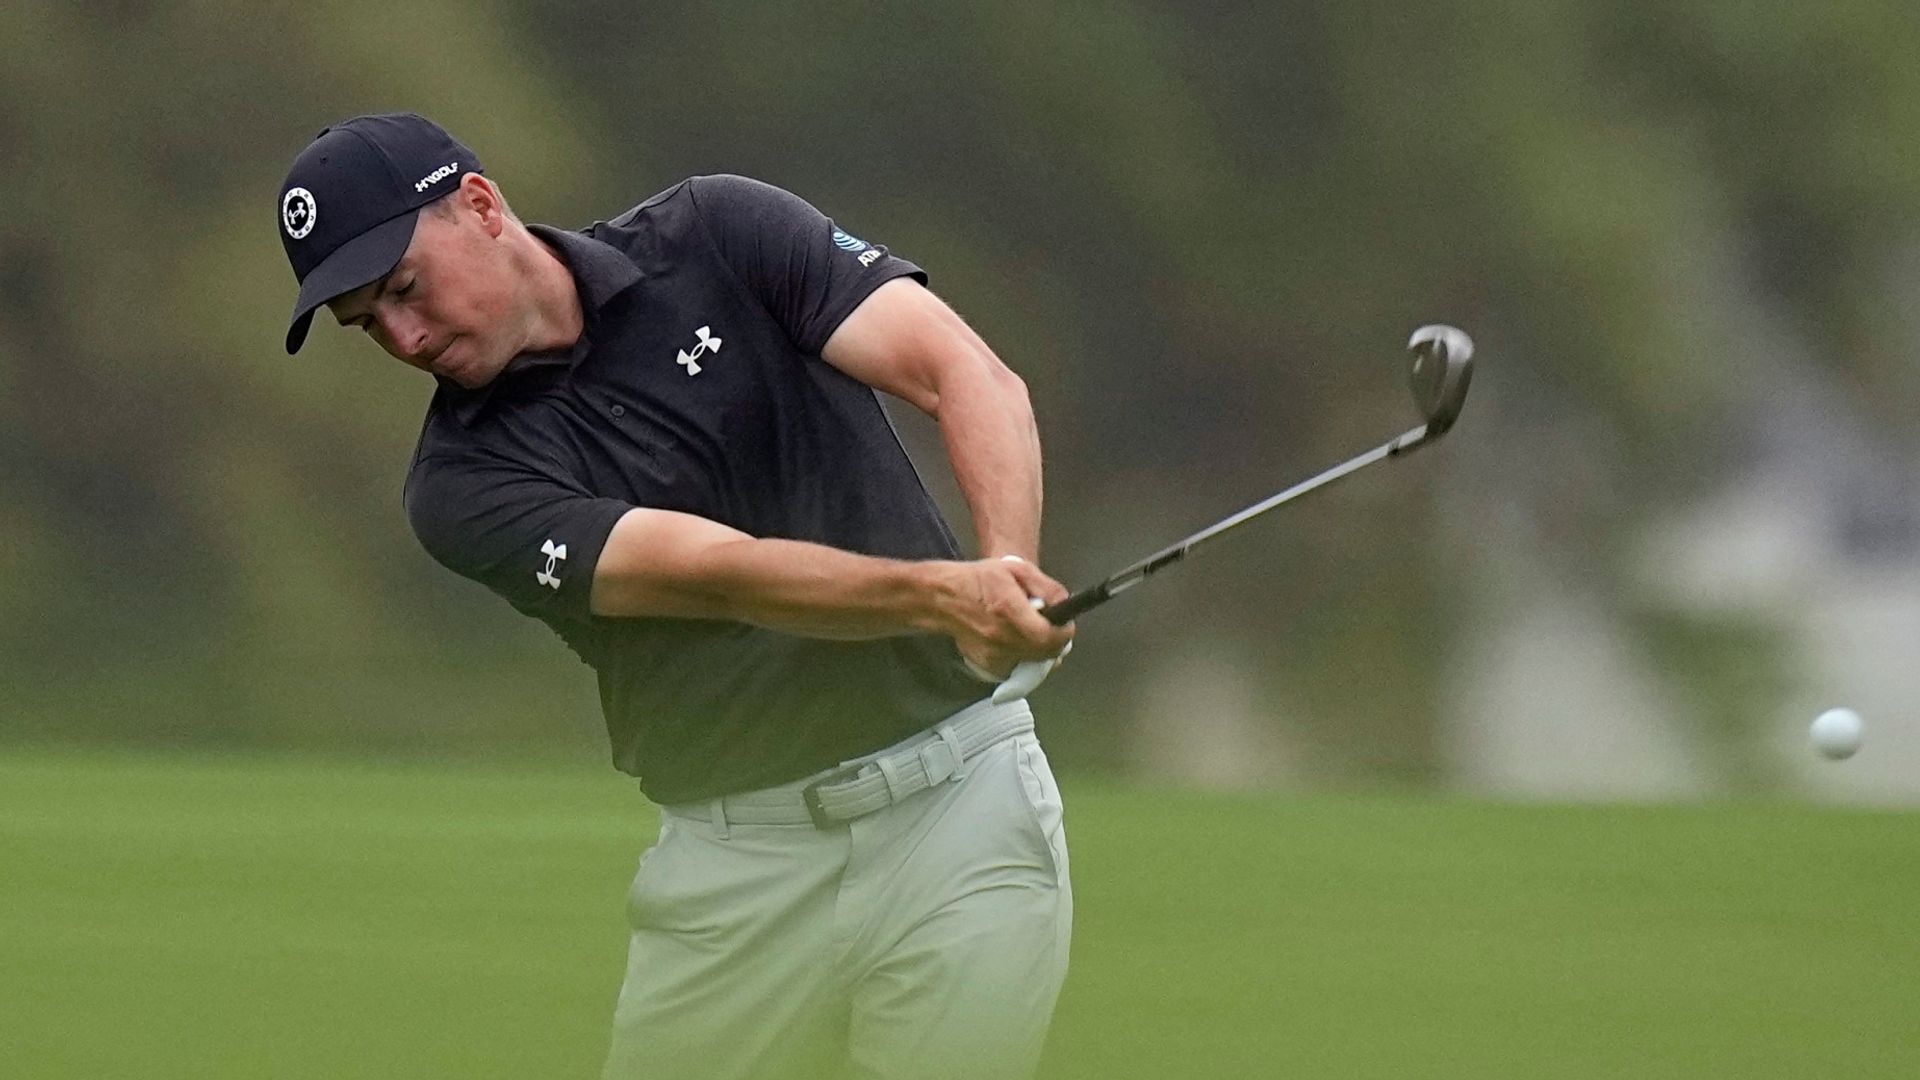 Spieth dumped out of Match Play by already-eliminated Lowry in Austin